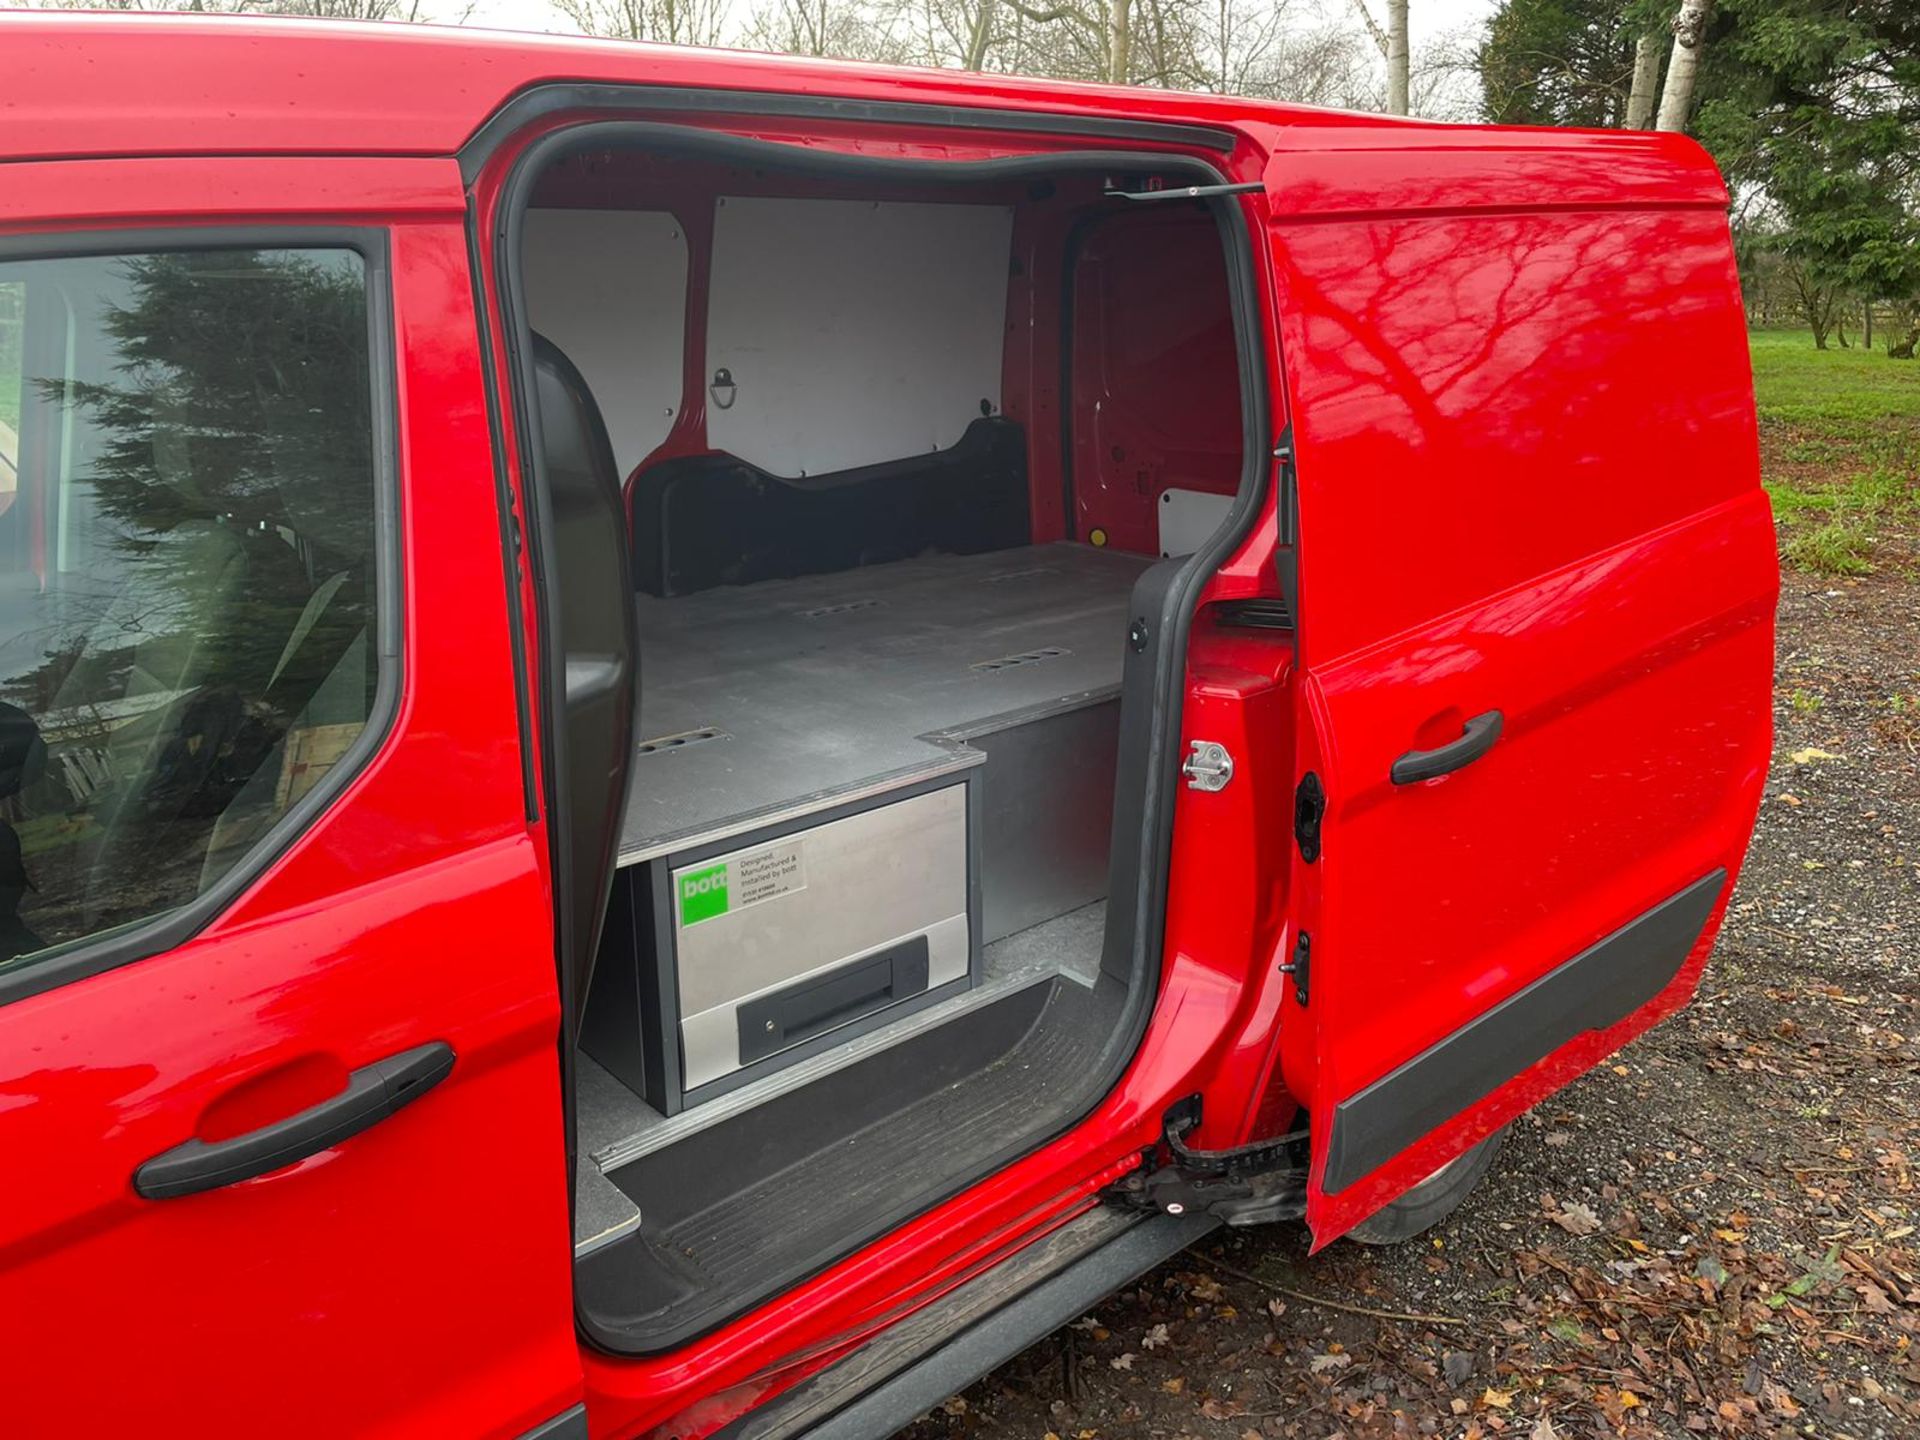 2014/64 REG FORD TRANSIT CONNECT 210 ECONETIC 1.6 DIESEL RED PANEL VAN, SHOWING 0 FORMER KEEPERS - Image 9 of 14